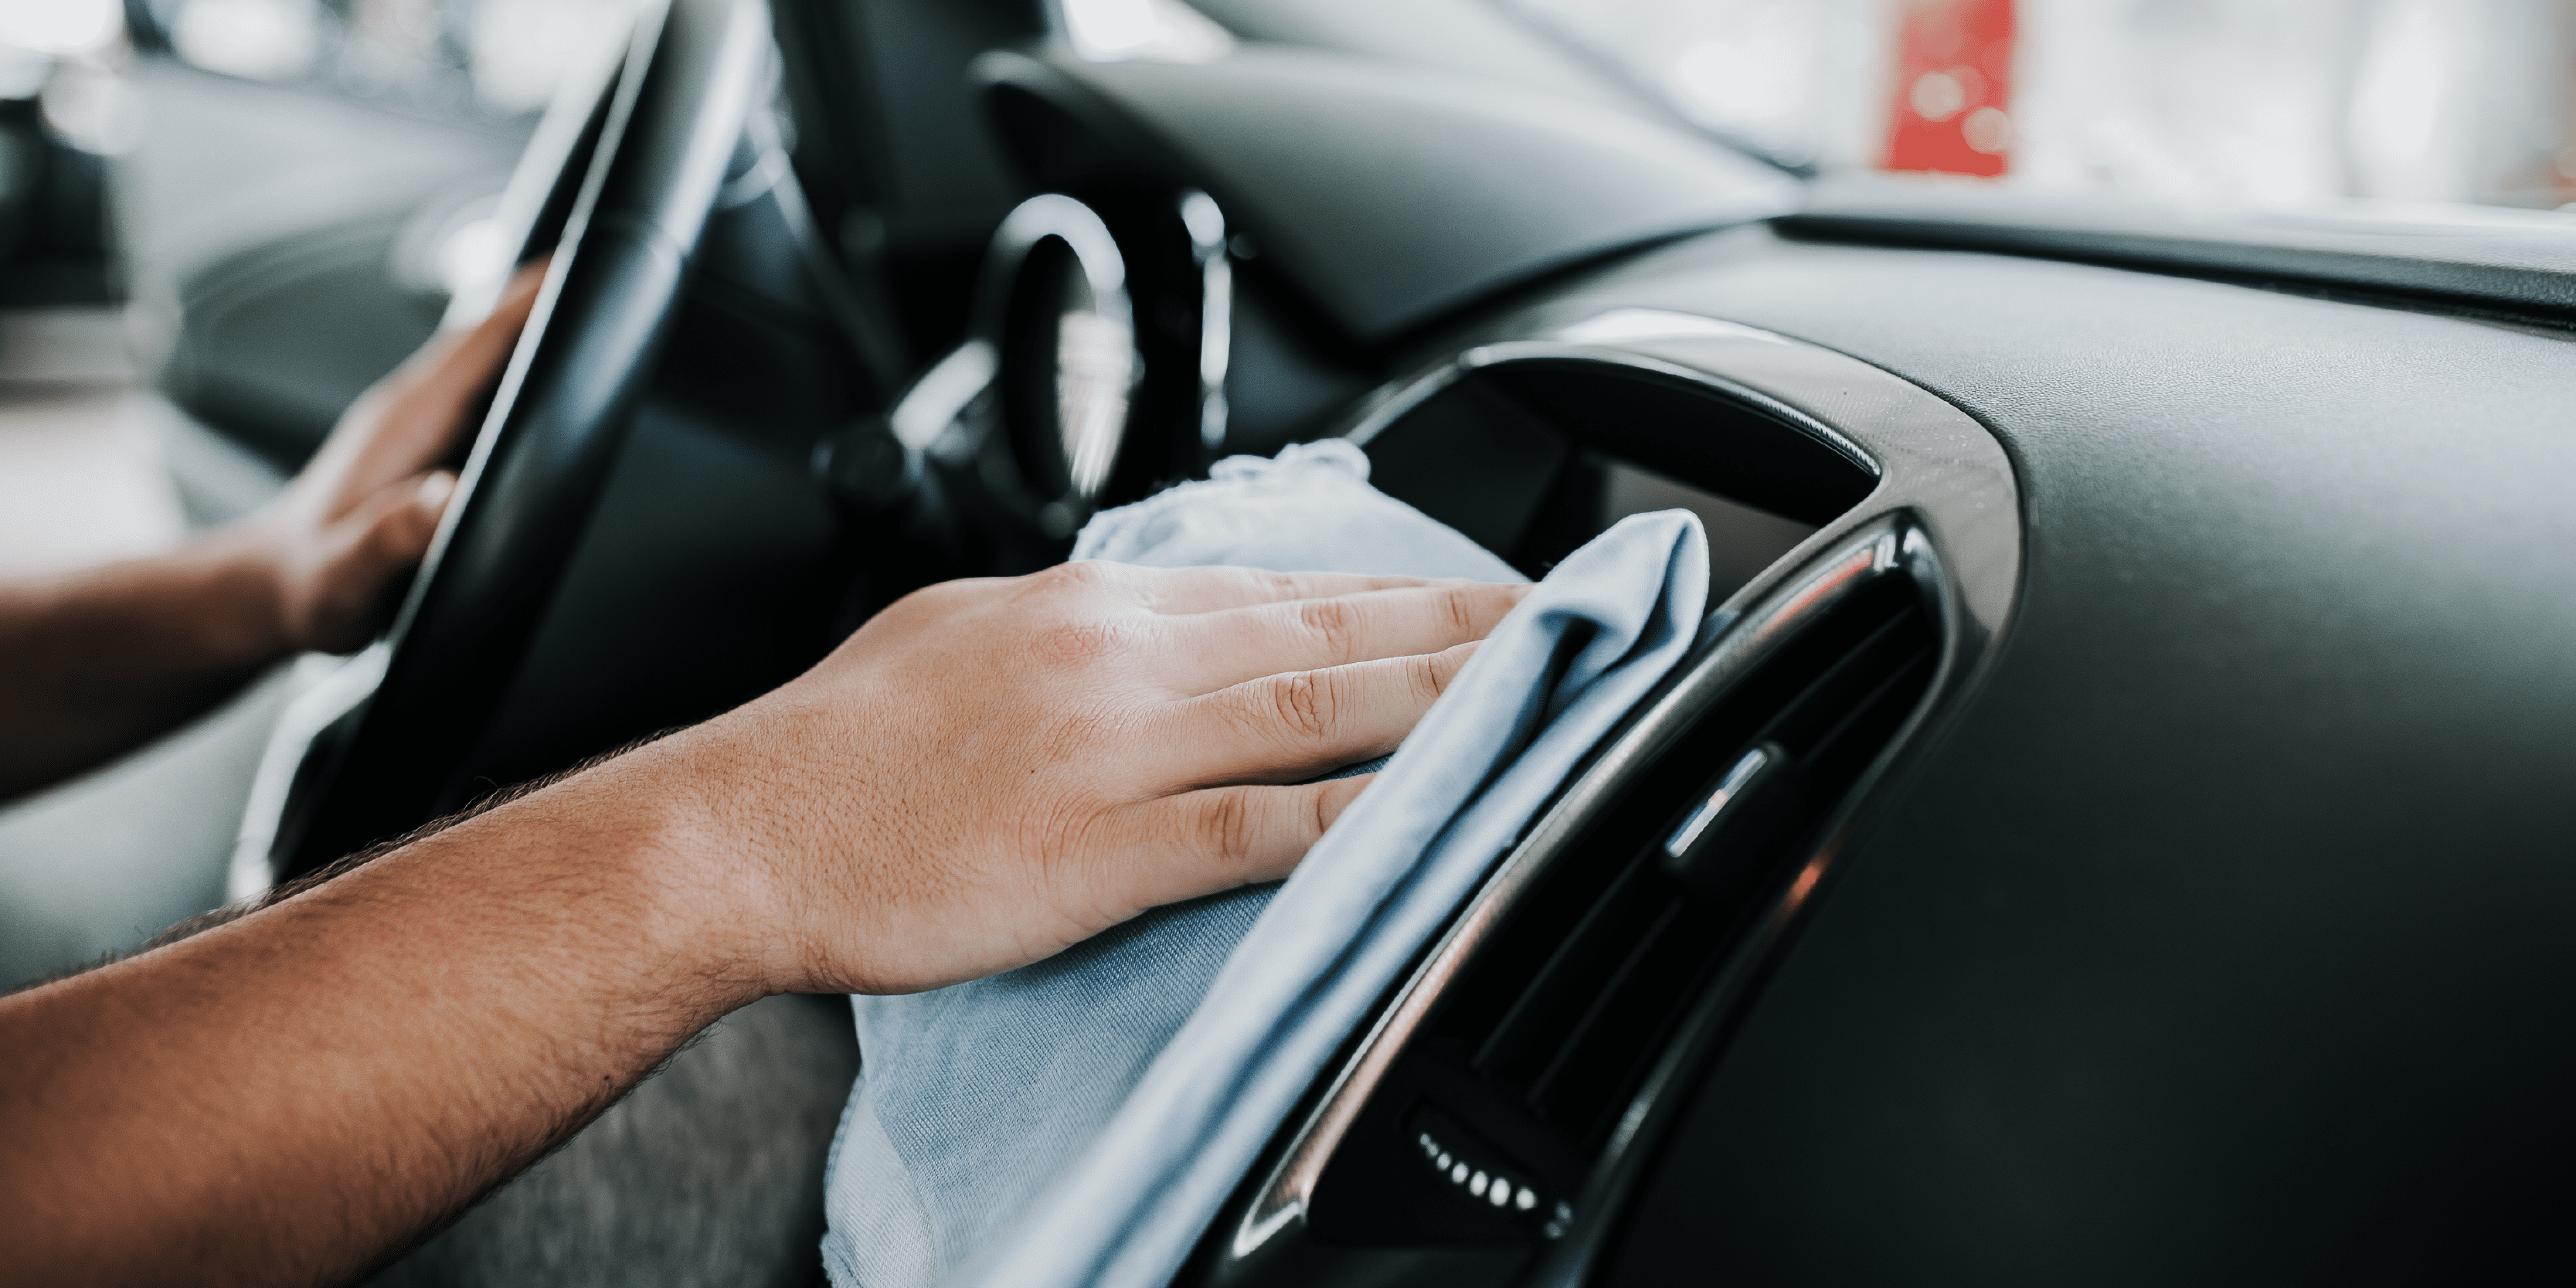 5 DIY Scratch Removal Tips - Get Your Car Looking Spotless Again!